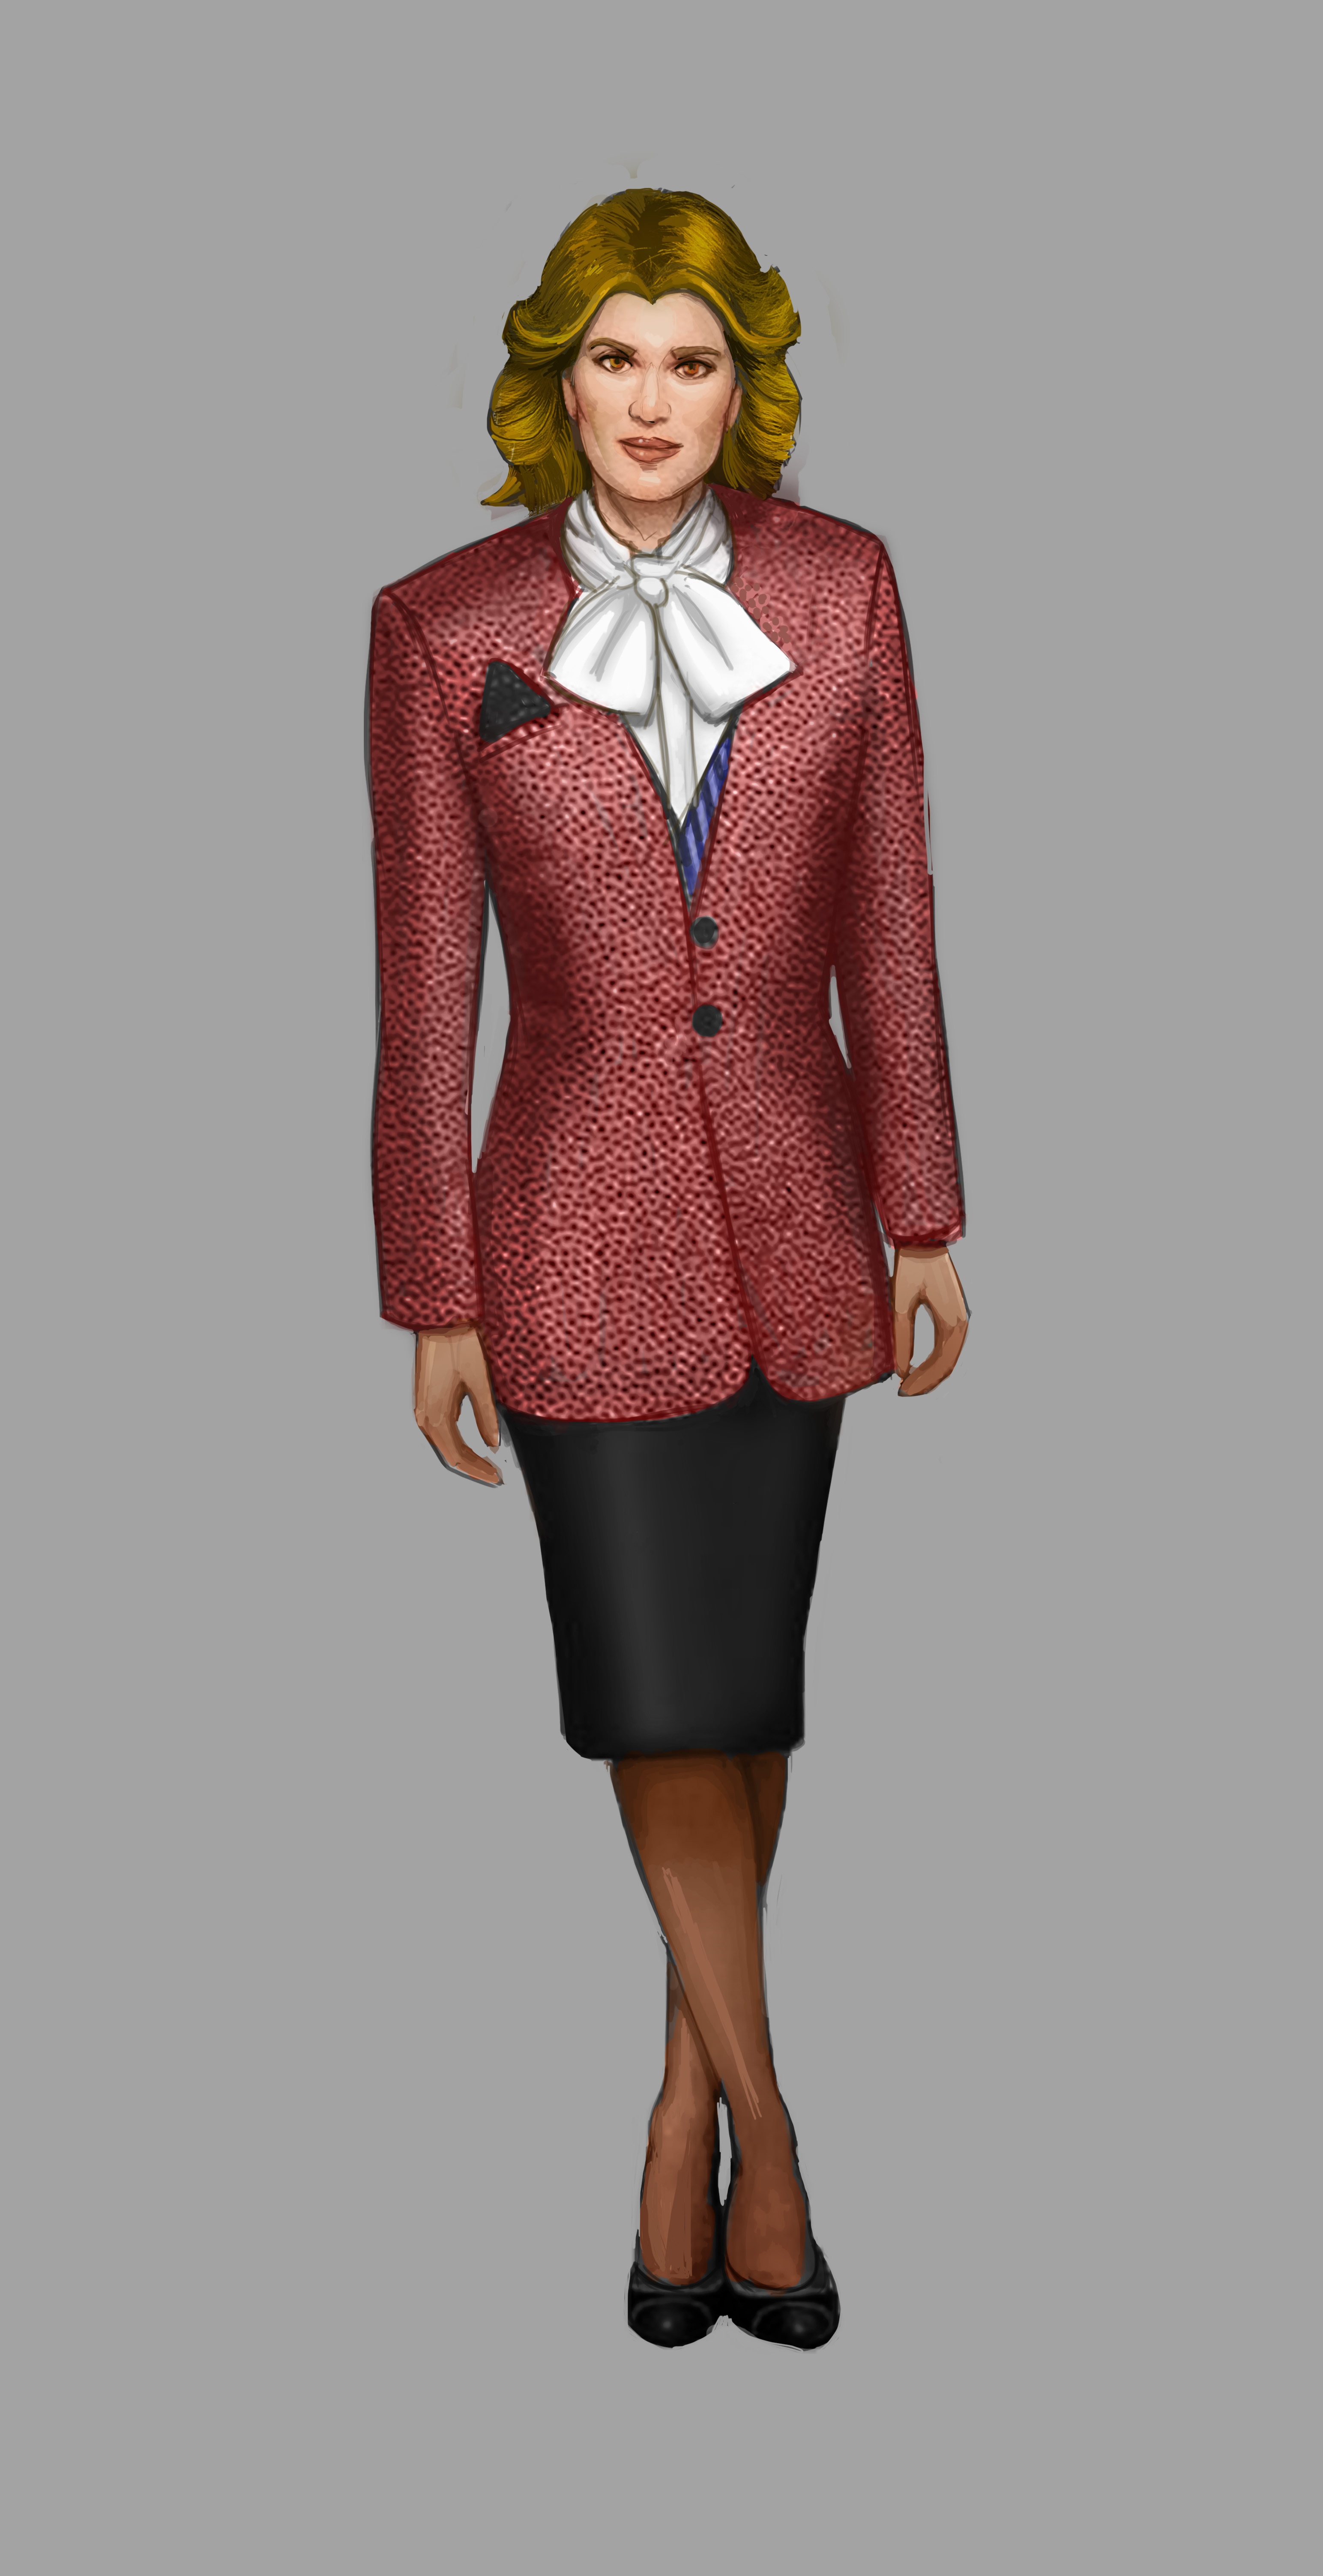 Computer Tycoon Woman Character